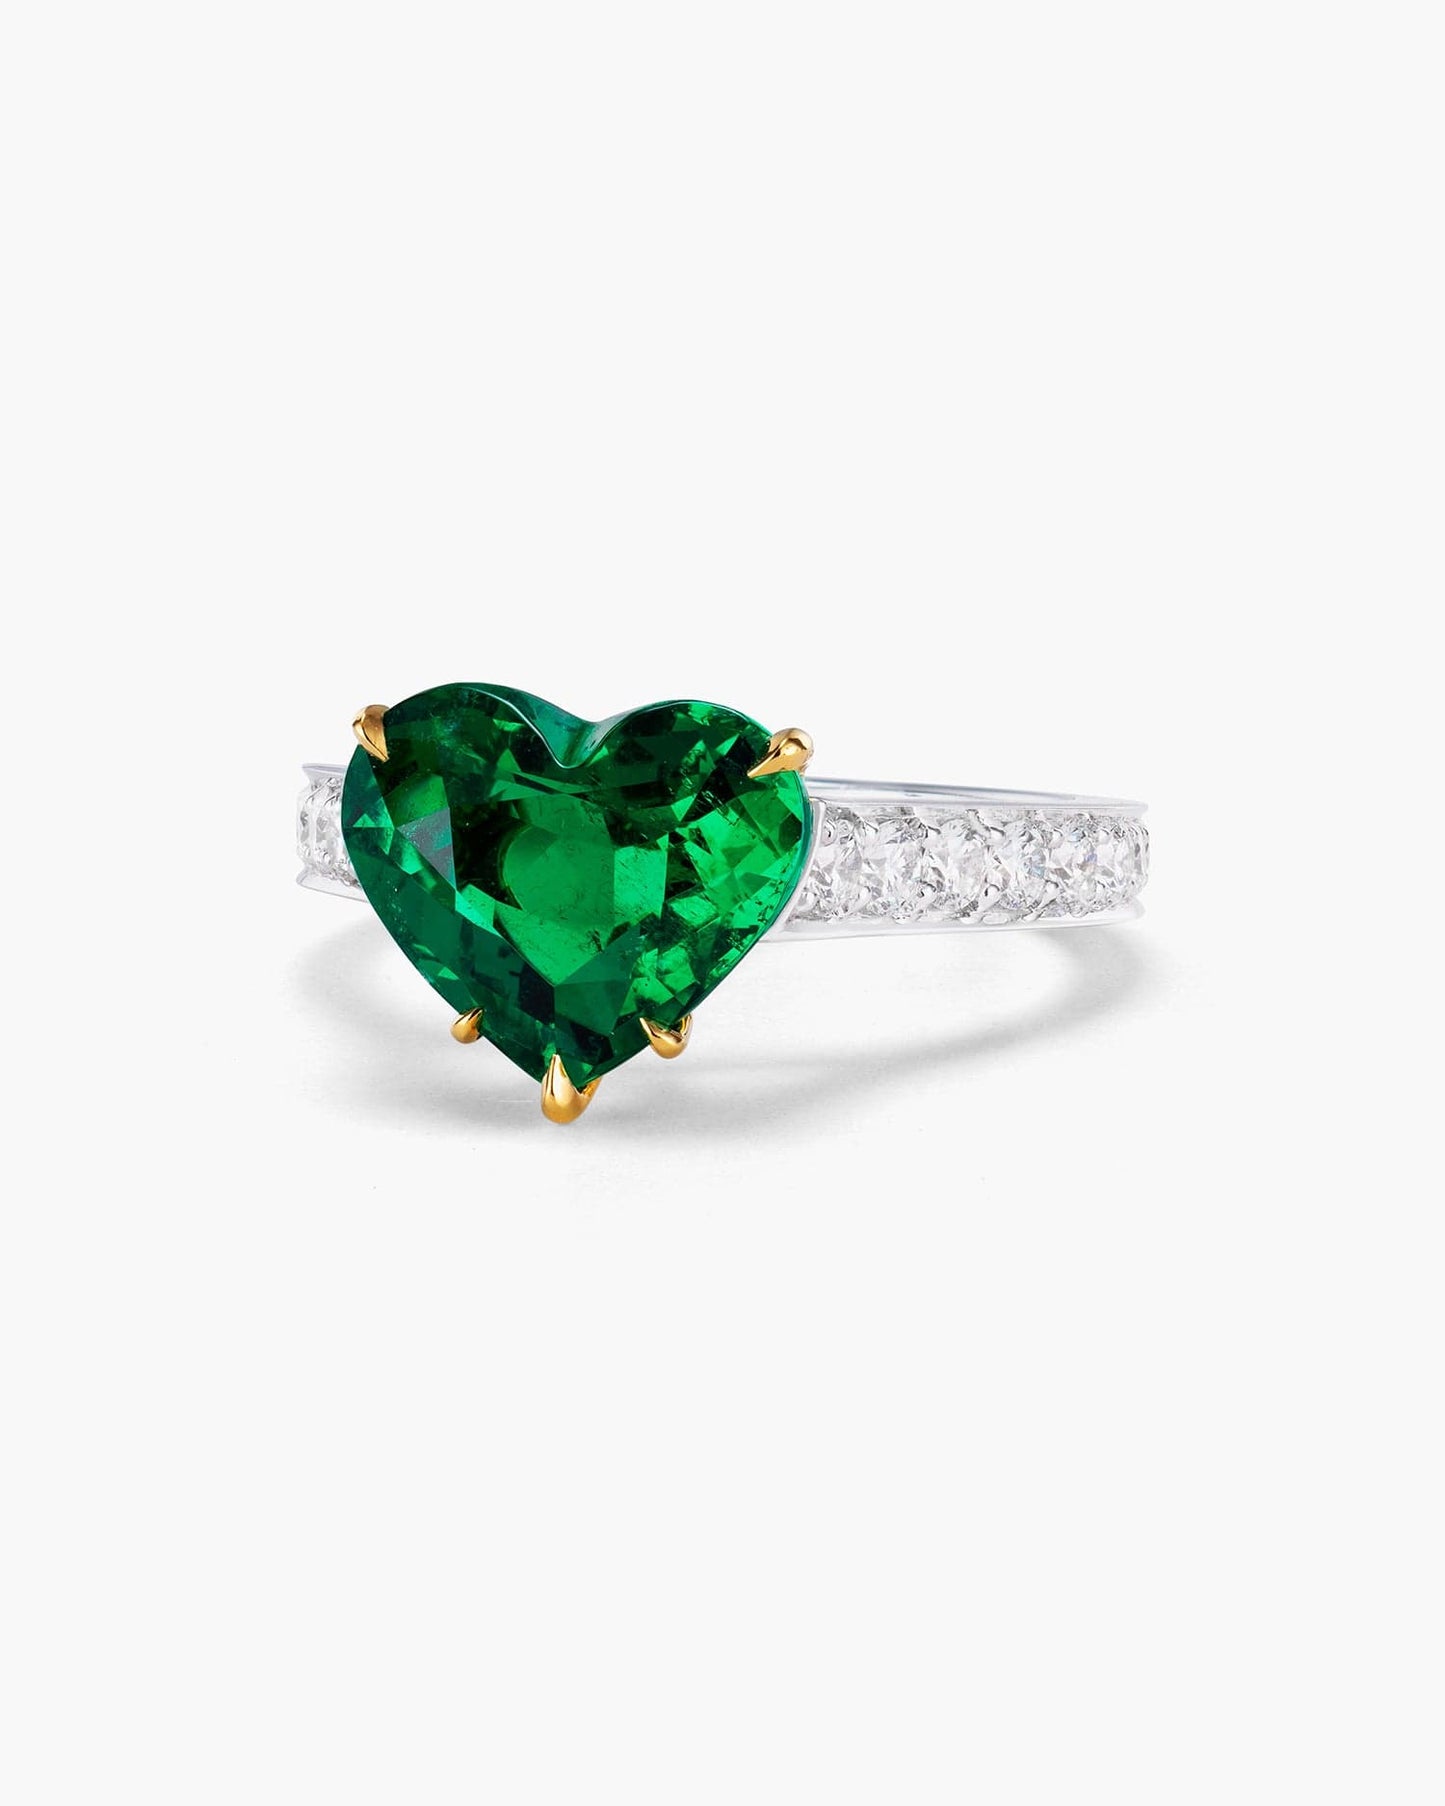 3.09 carat Heart Shape Colombian Emerald and Diamond Ring